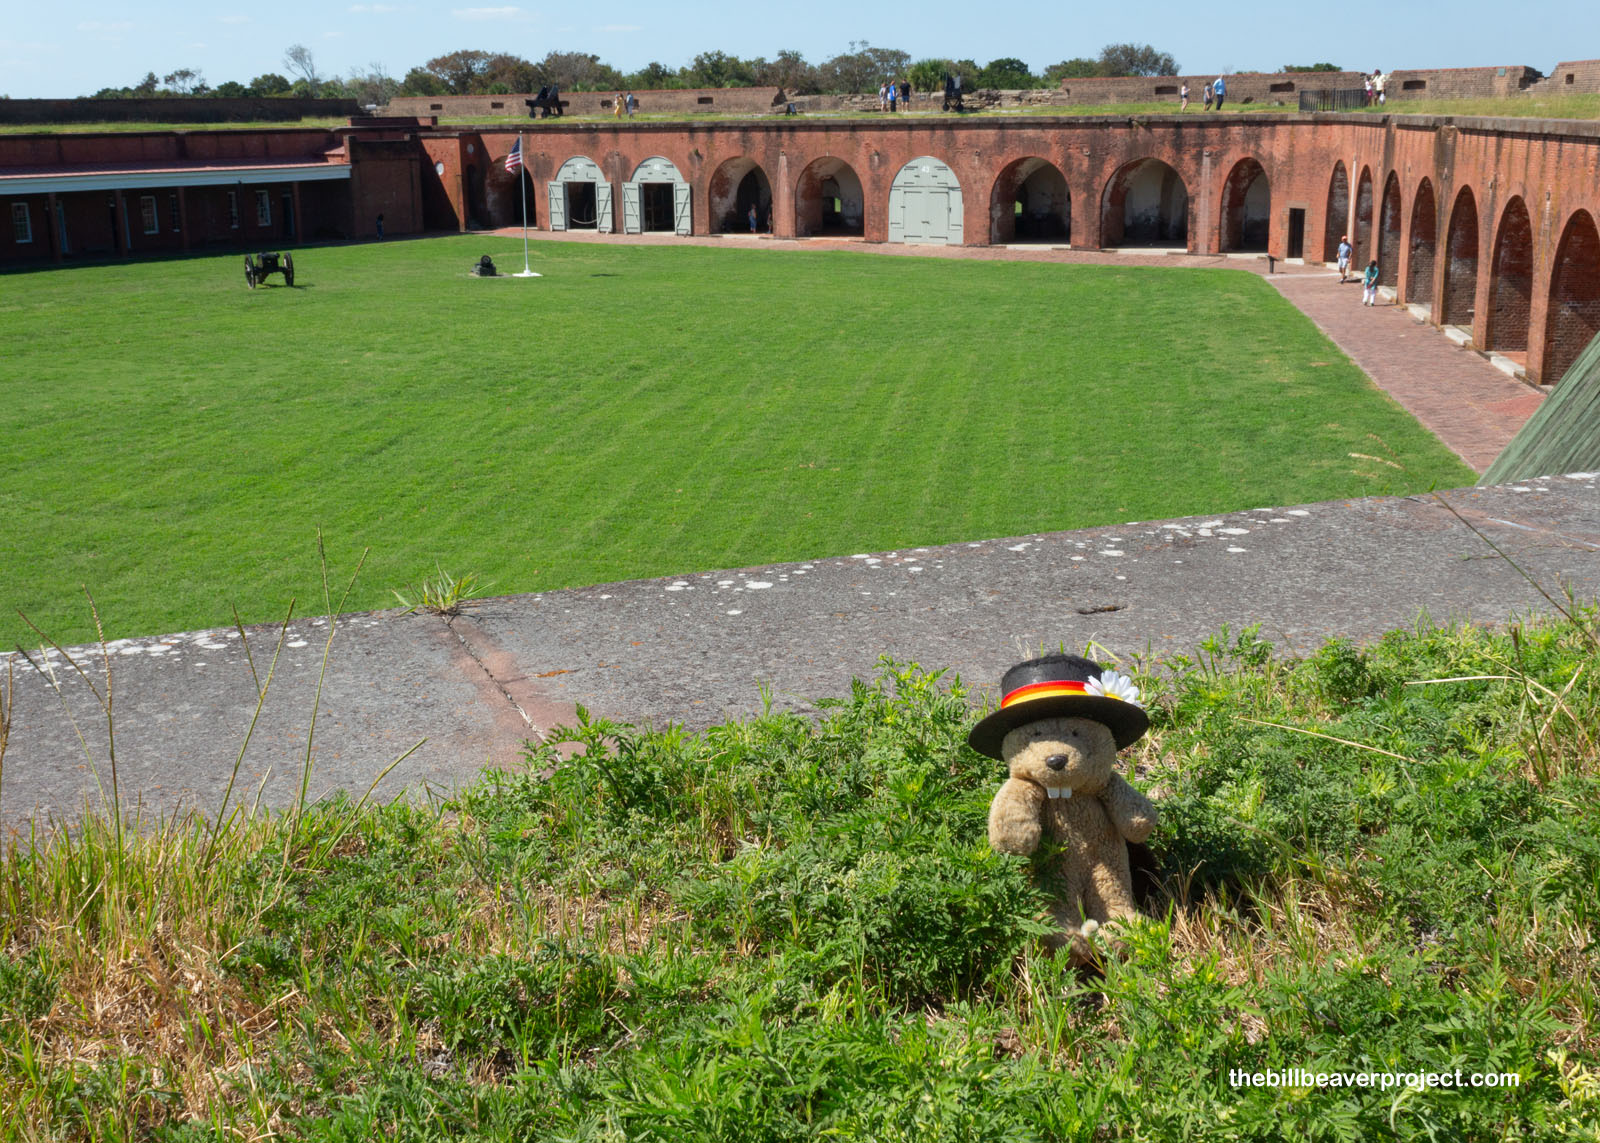 The inside of Fort Pulaski as seen from above!